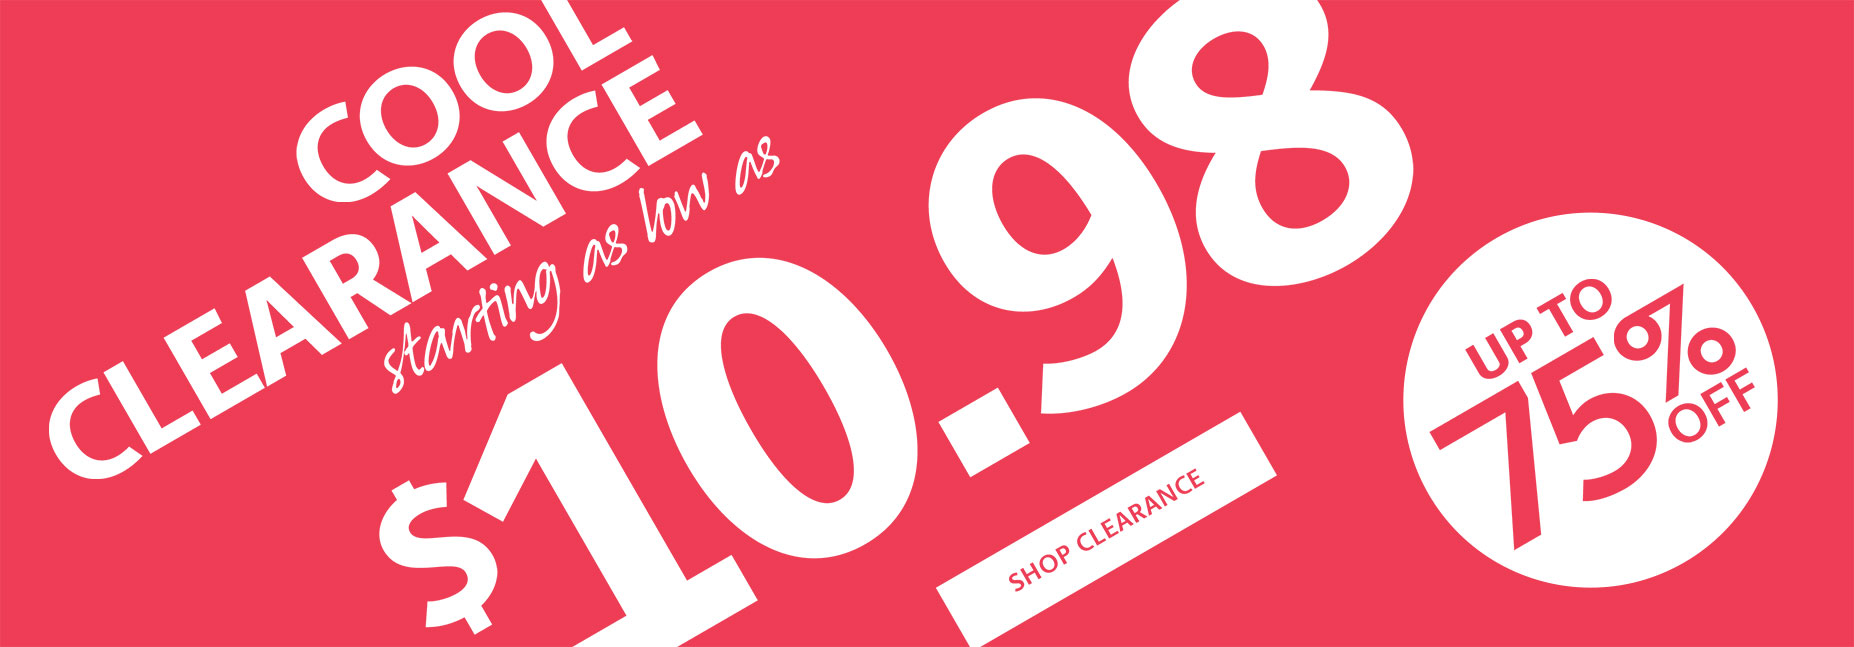 Clearance up to 75% Off